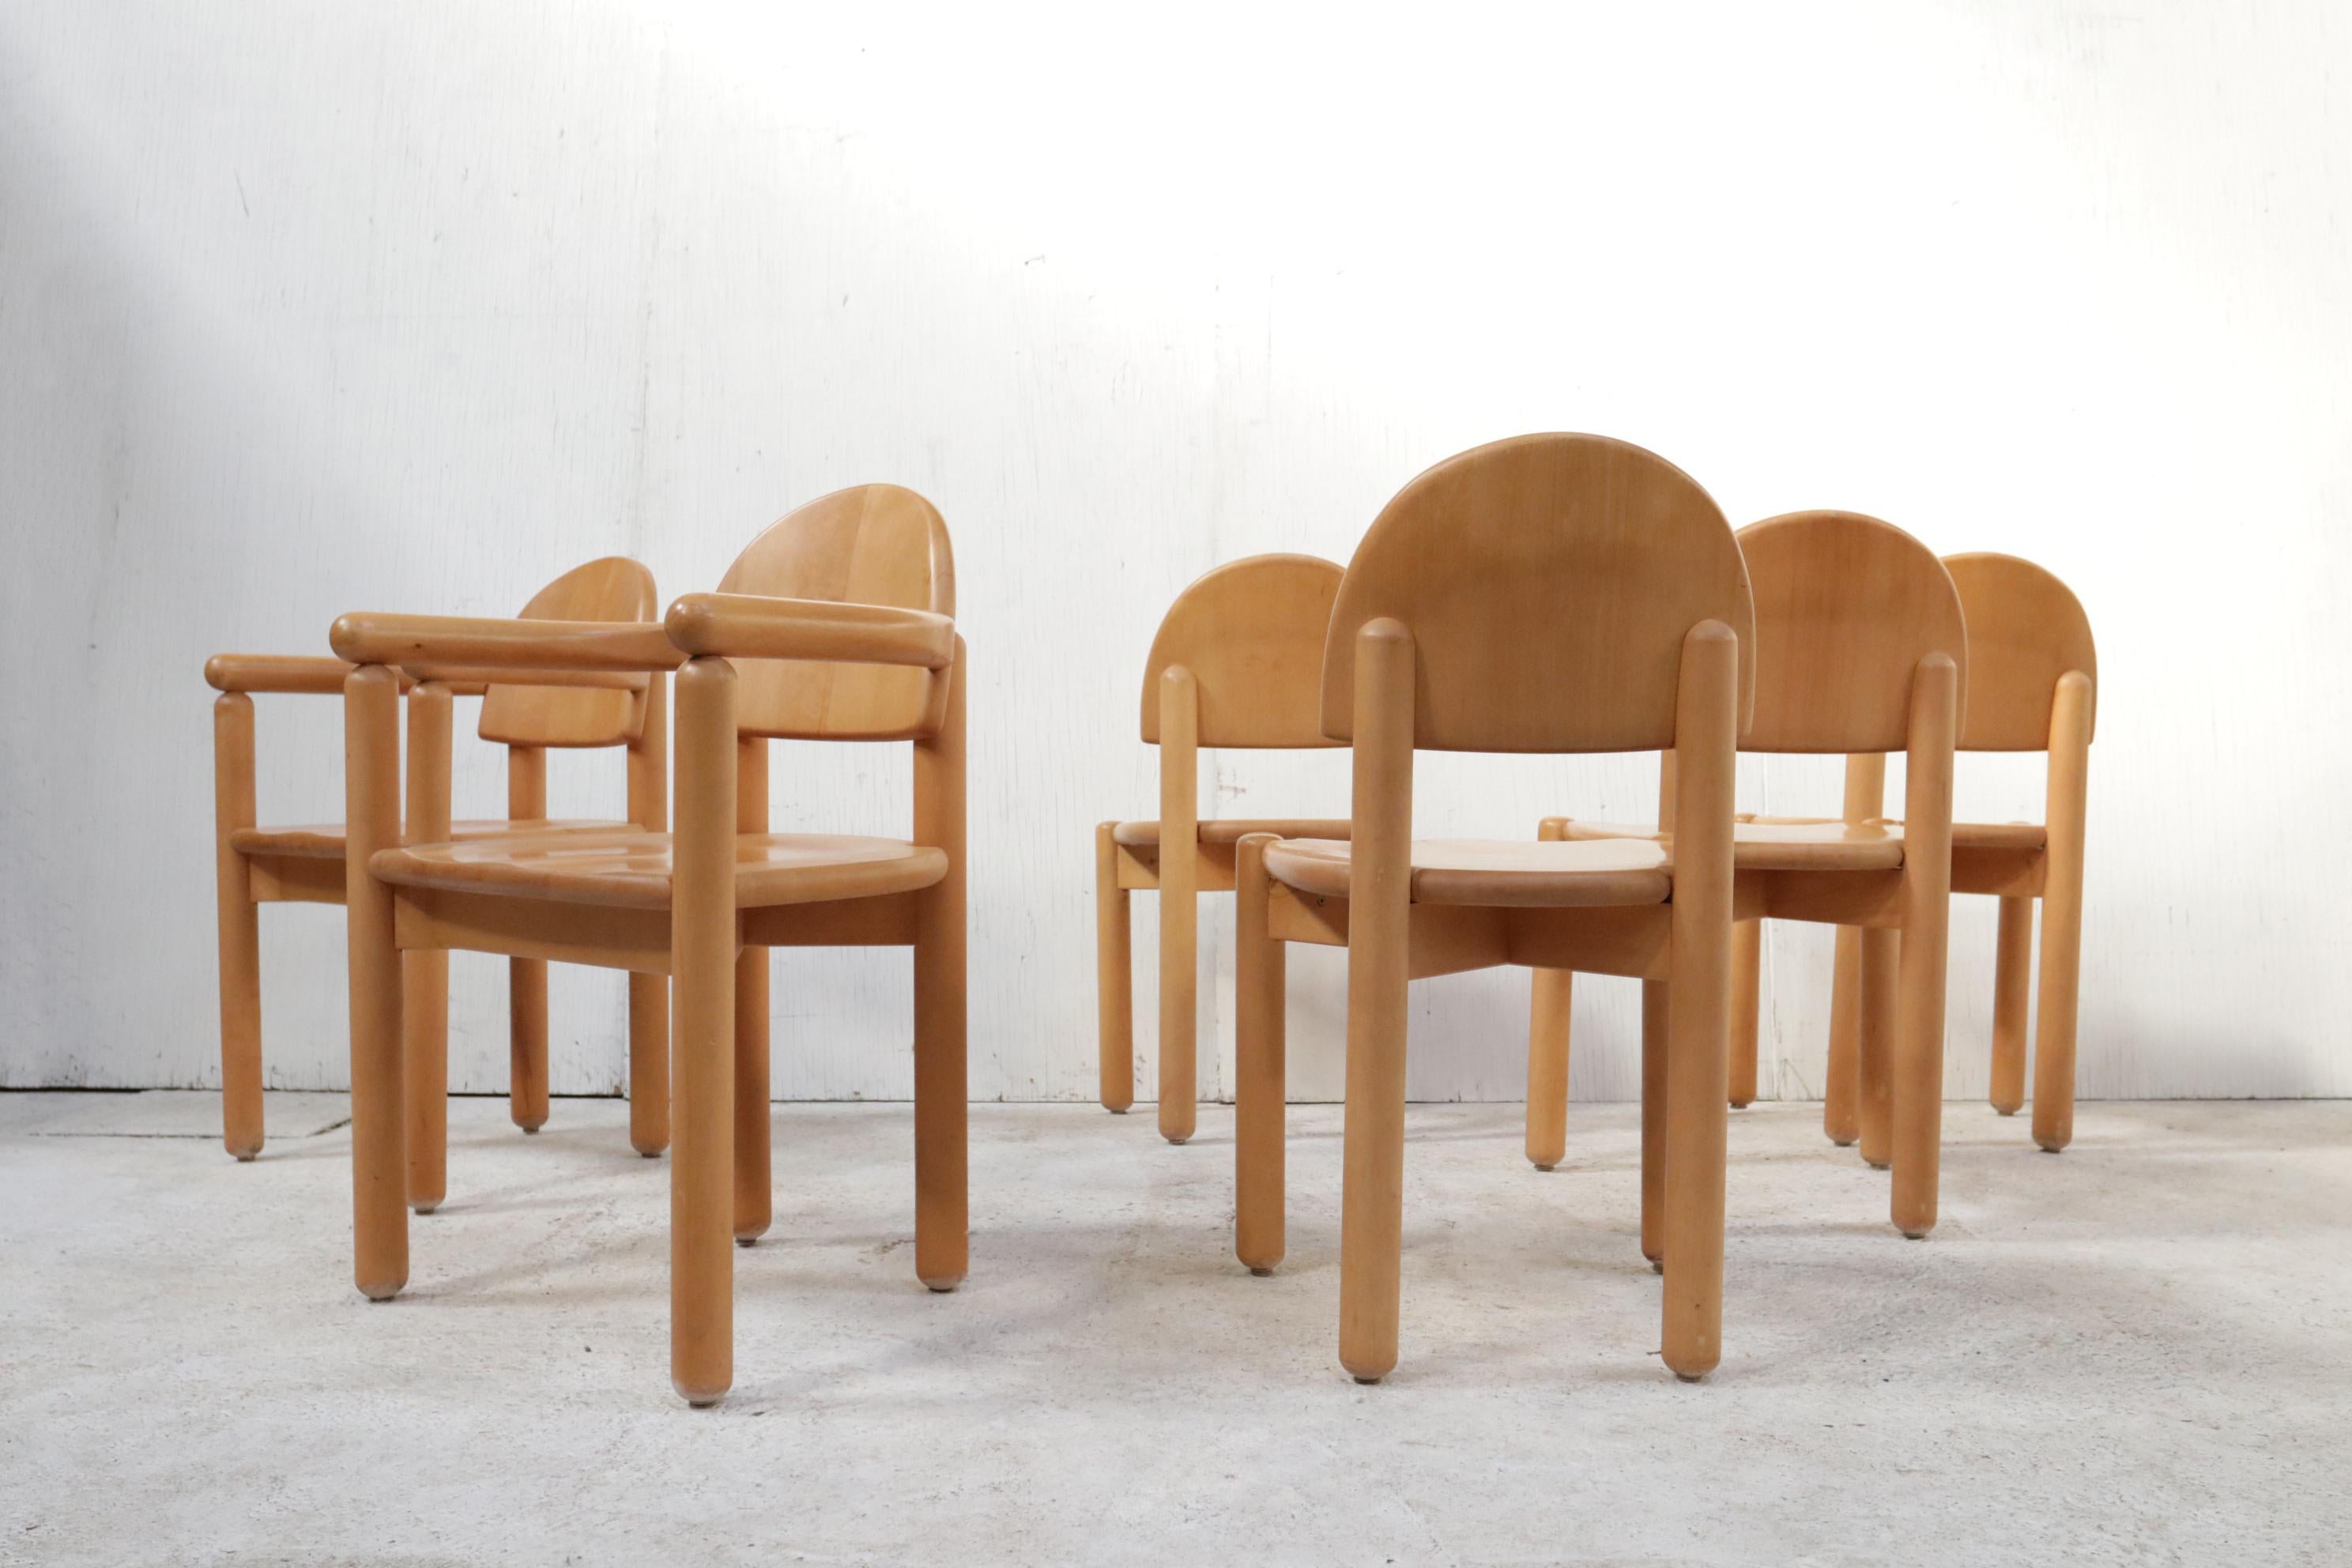 Beautiful set of six very sculptural dining room chairs in beeche wood by Swedish architect and designer Rainer Daumiller, manufactured by Hirtshalls Sawmills. 
The beech variant is more rare to find than the Pine.
They are very comfortable to sit